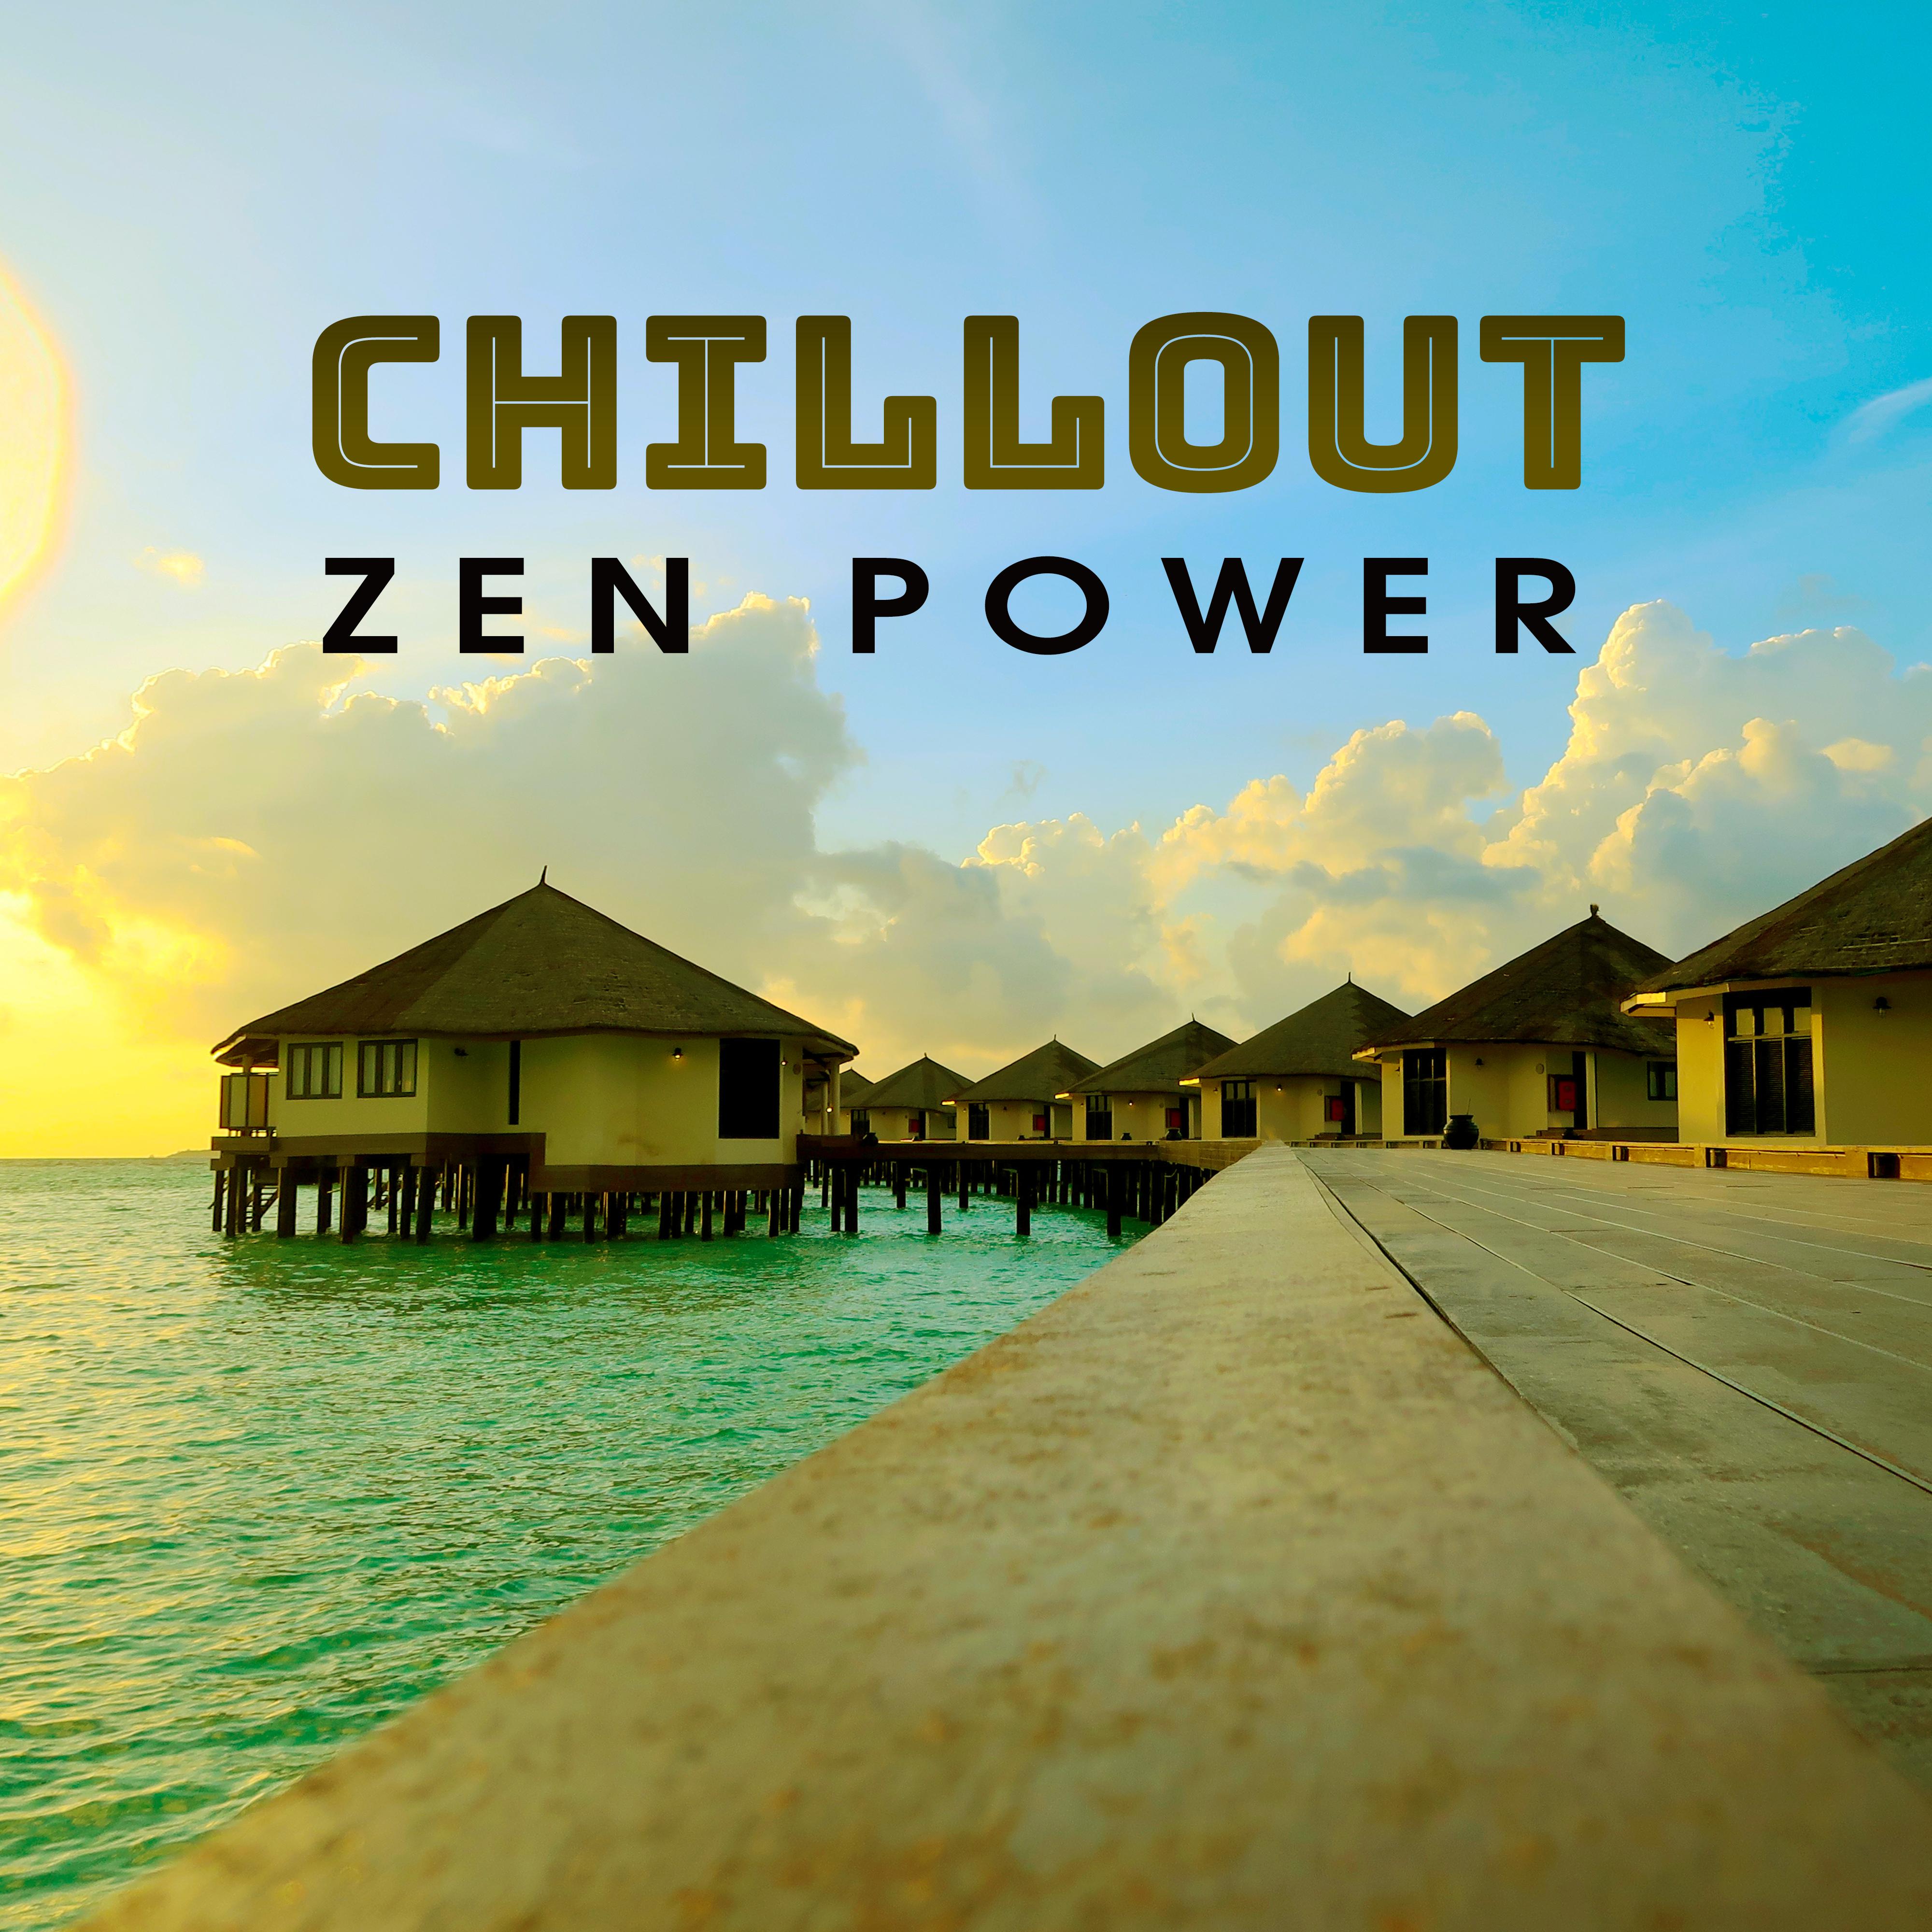 Chillout Zen Power  Peaceful Chillout, Music for Yoga, Meditation, Relaxation, Rest, Godd Vibes Only